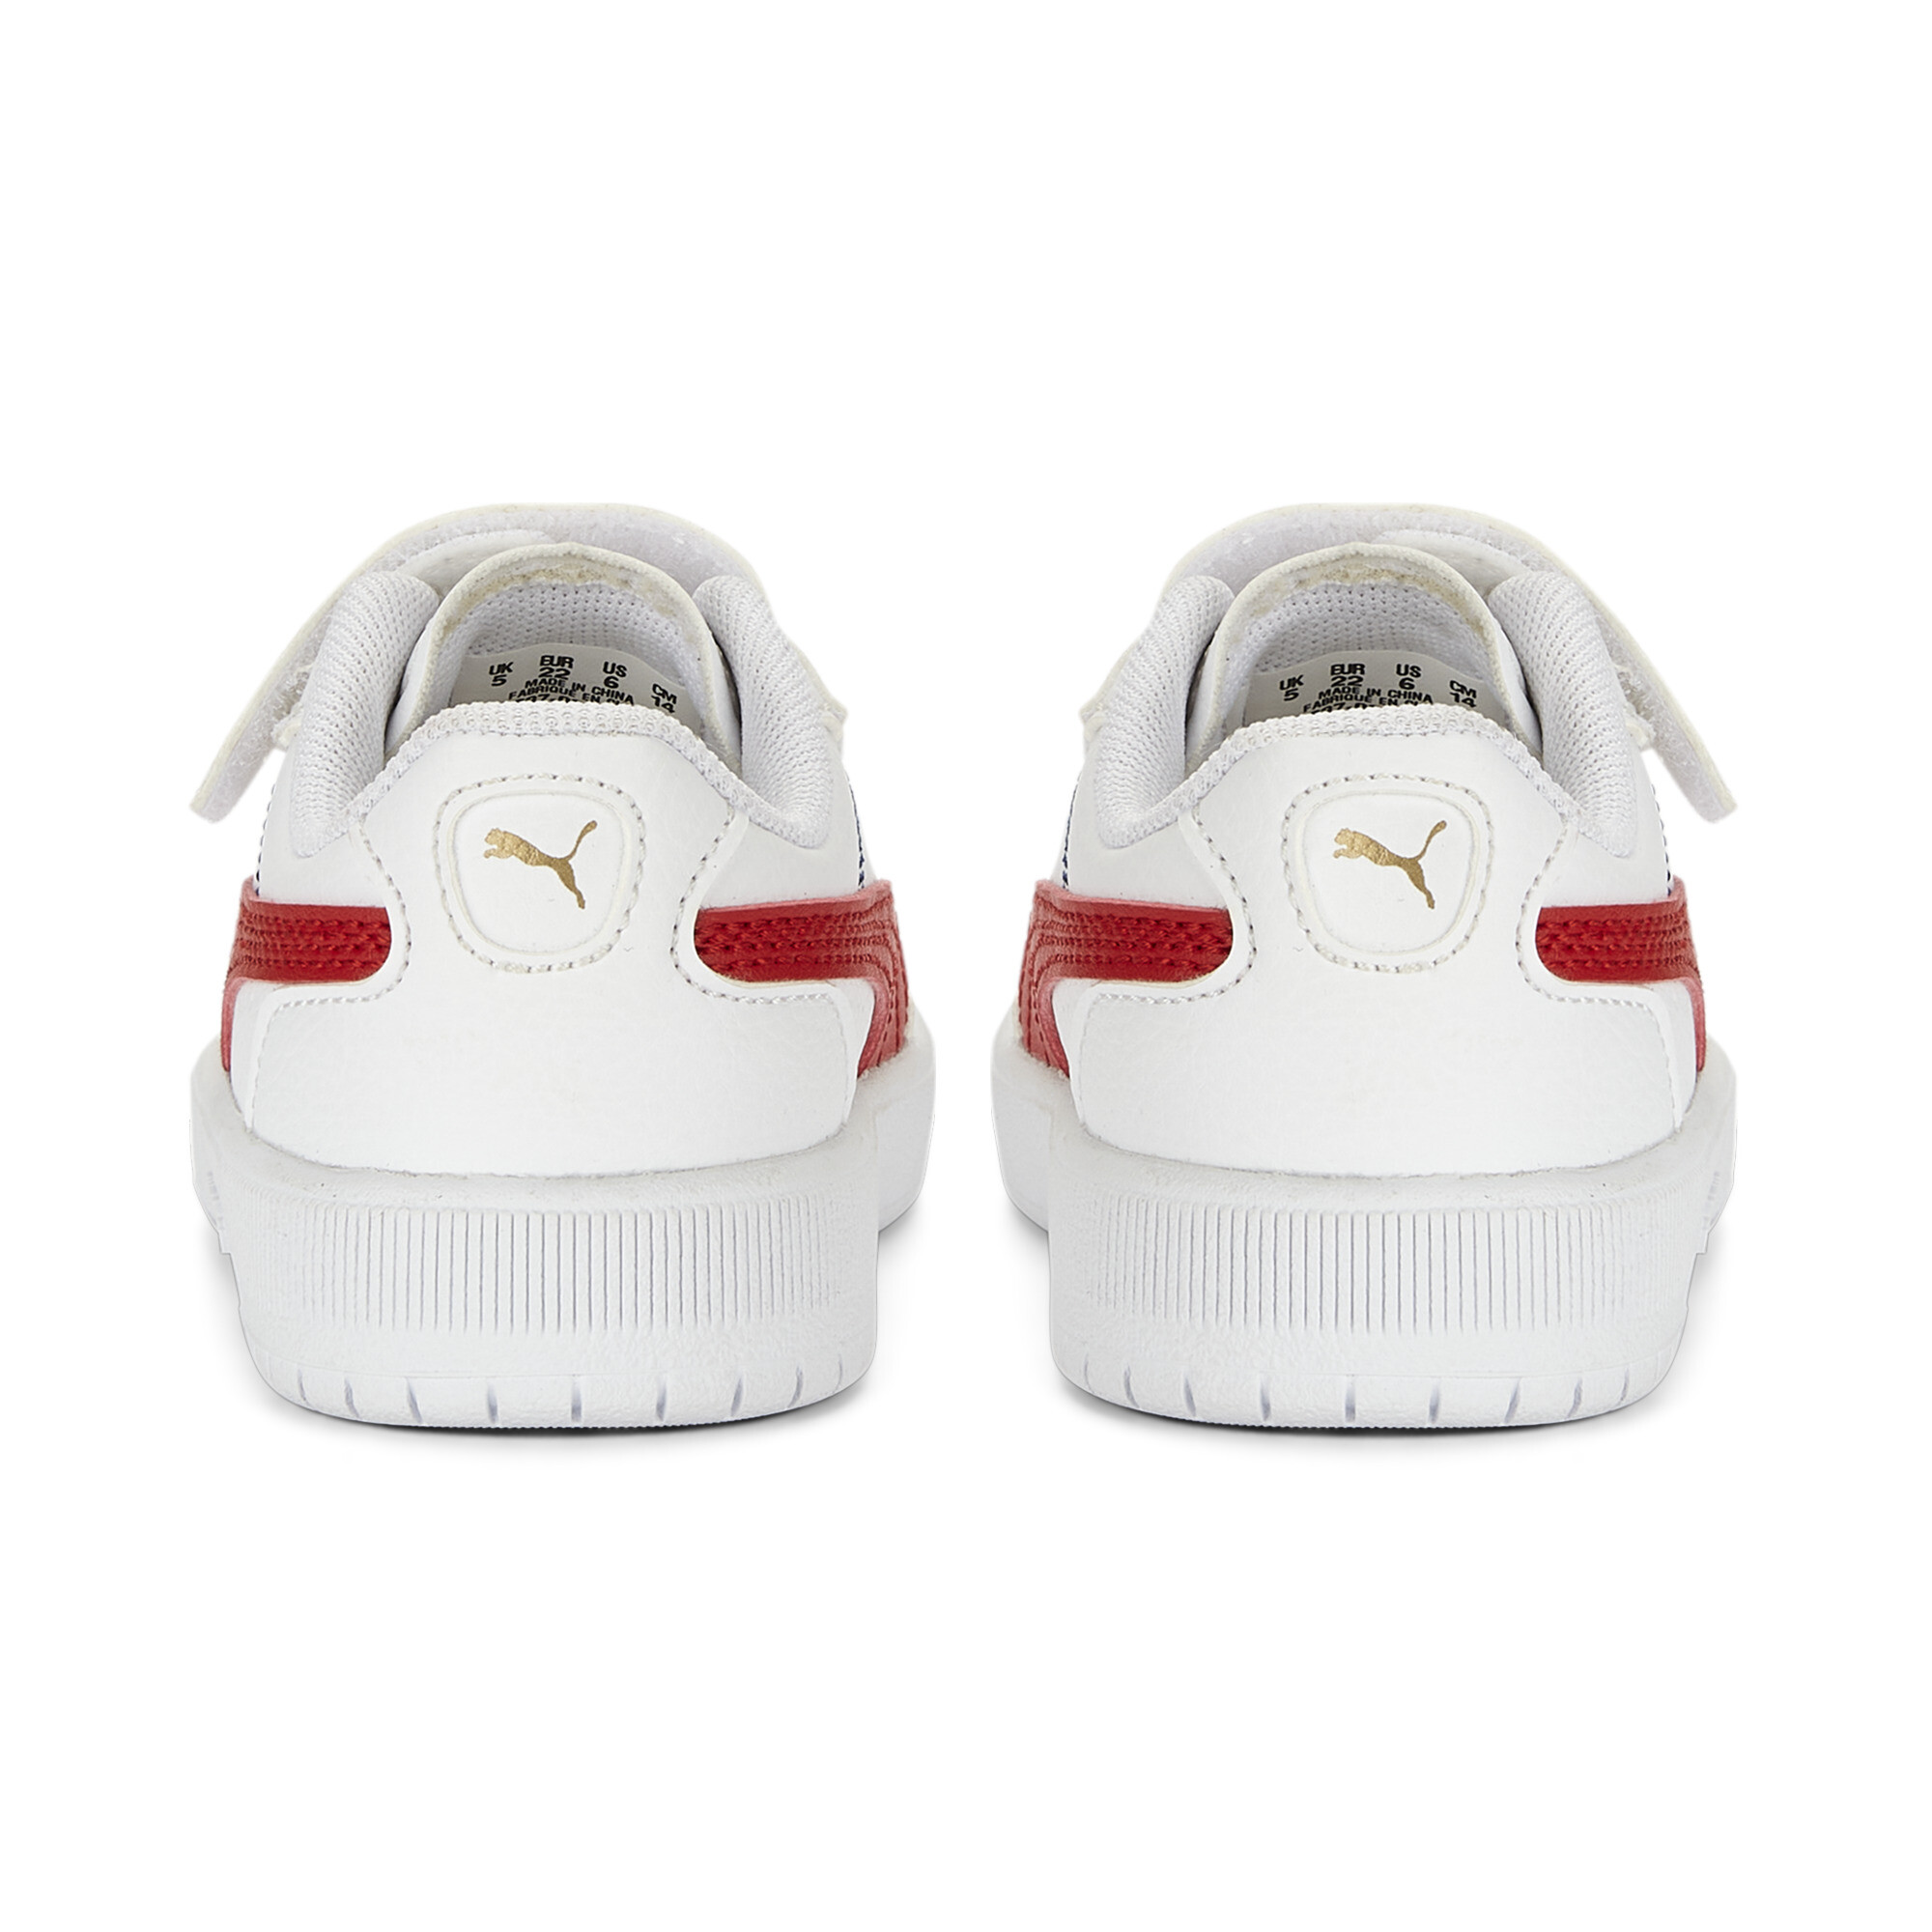 Kids' PUMA Court Ultra Shoes Baby In 20 - White, Size EU 19